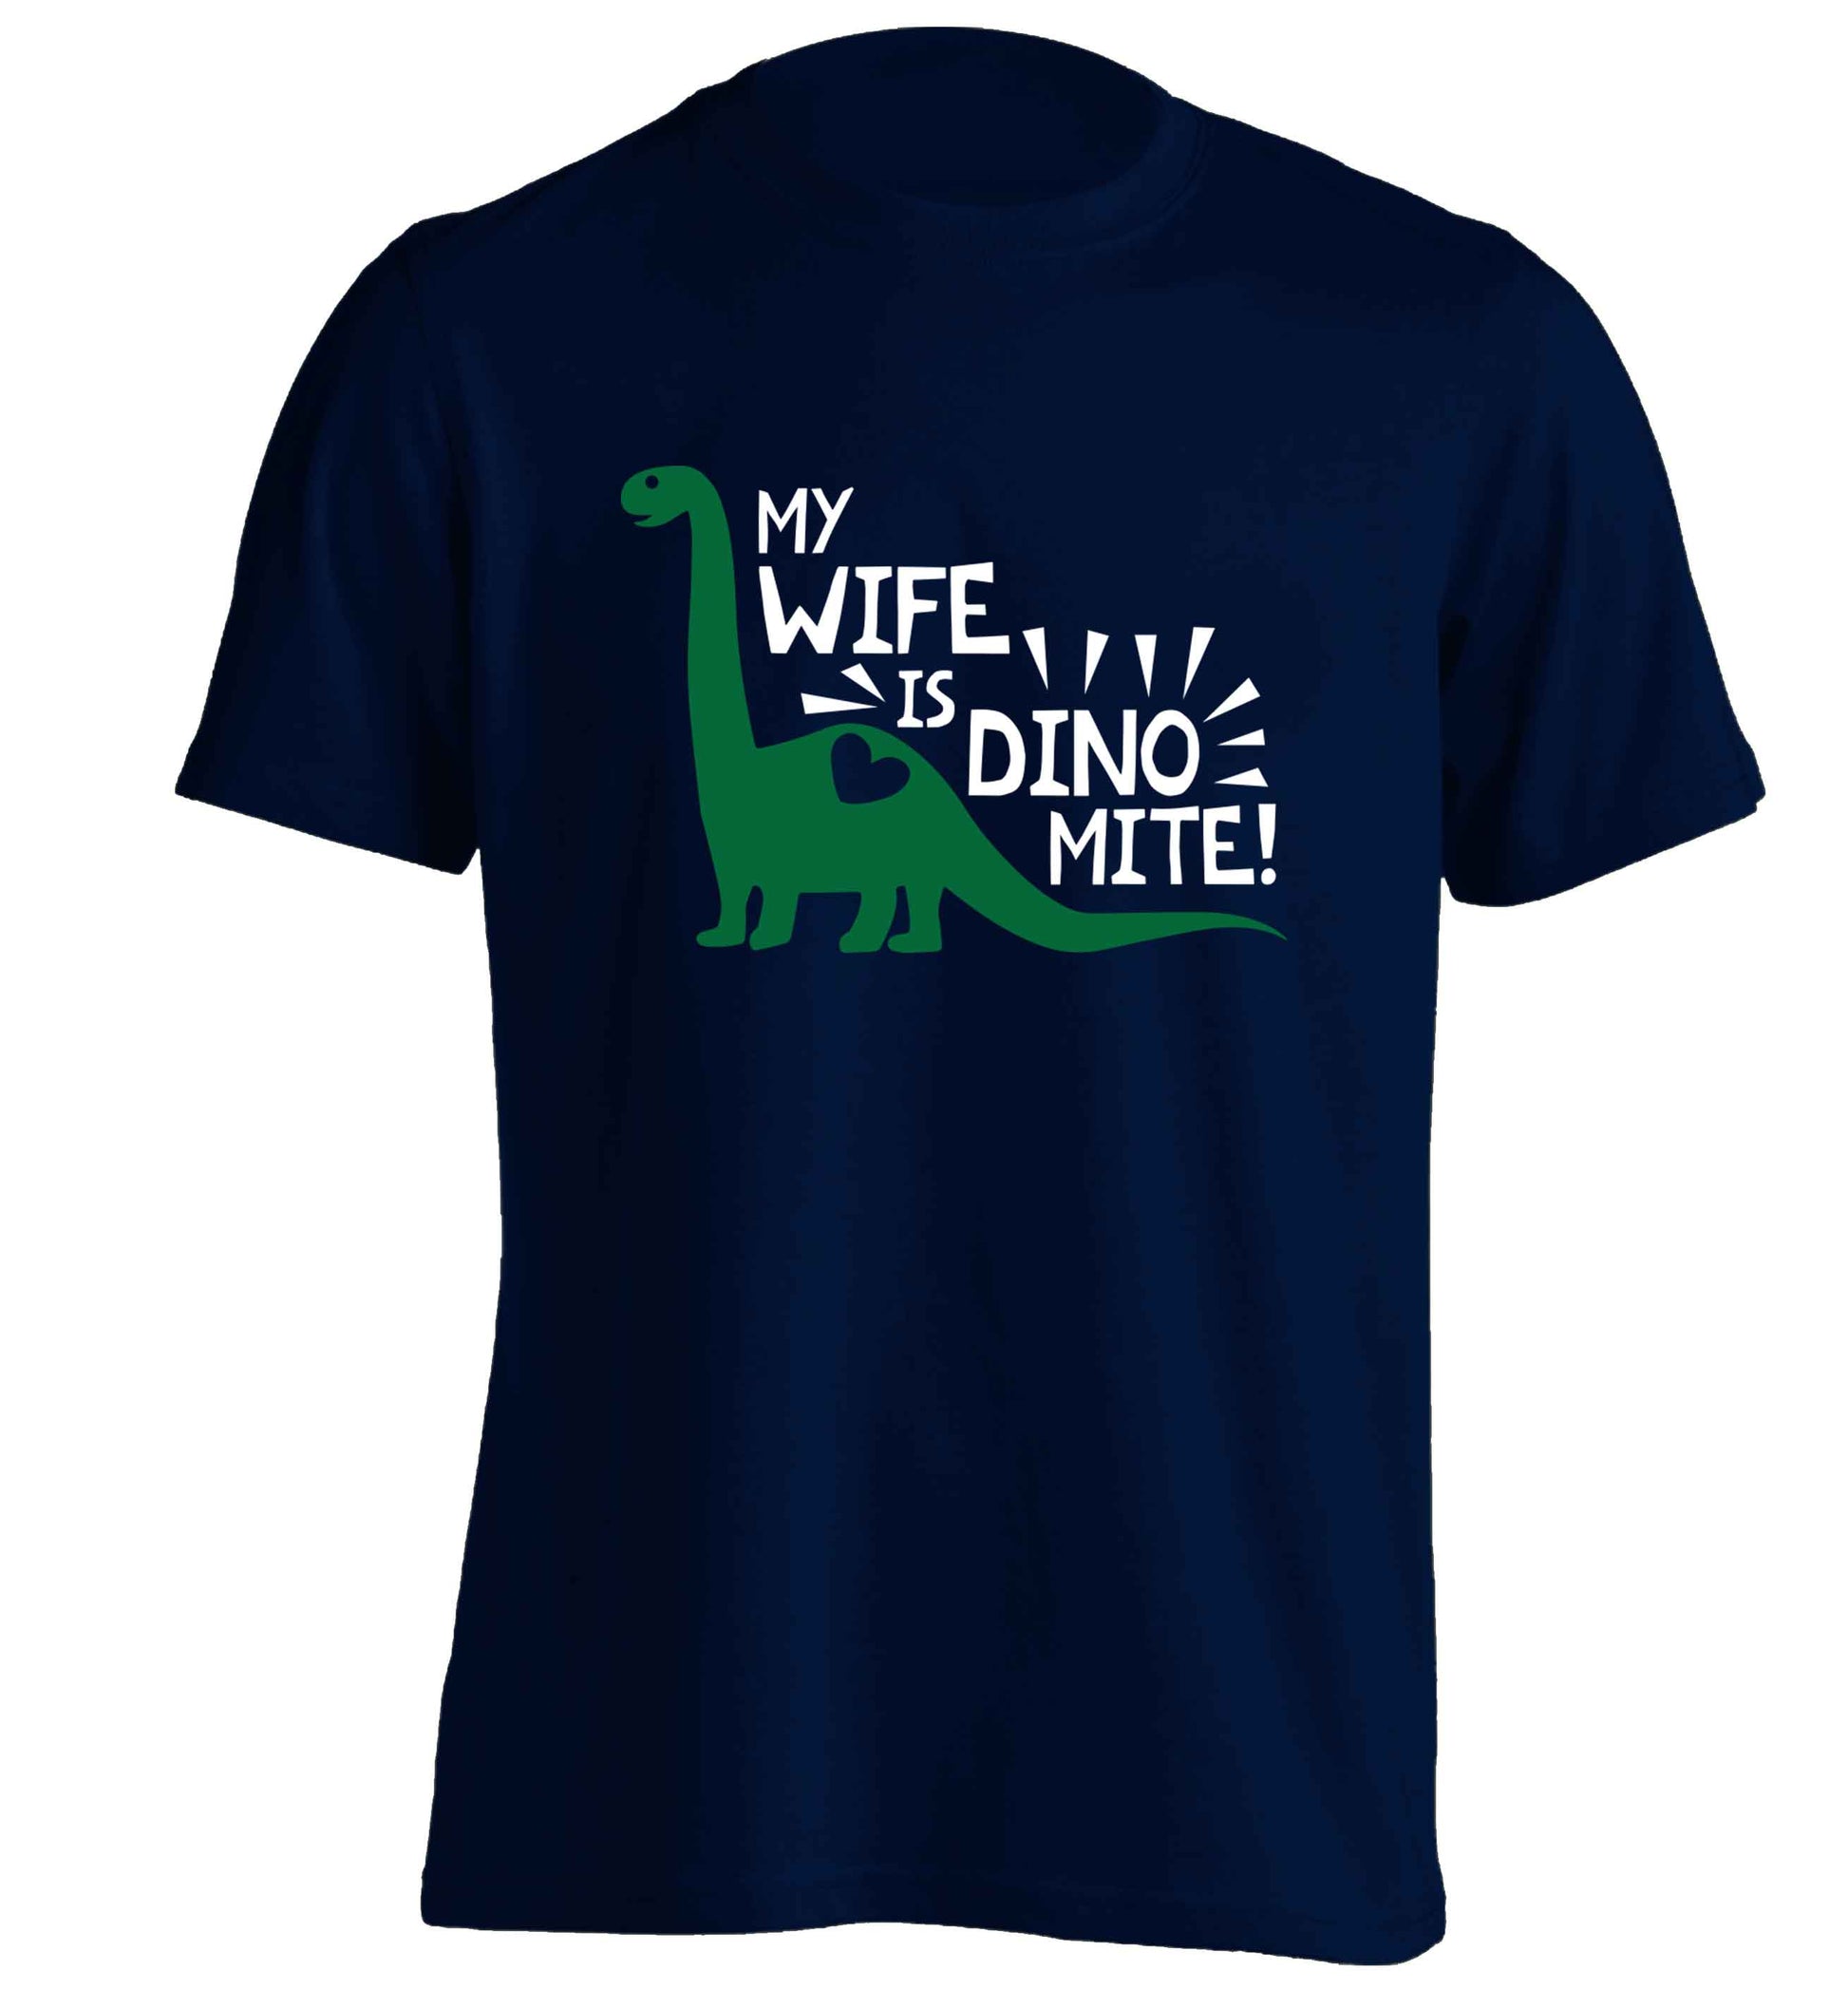 My wife is dinomite! adults unisex navy Tshirt 2XL